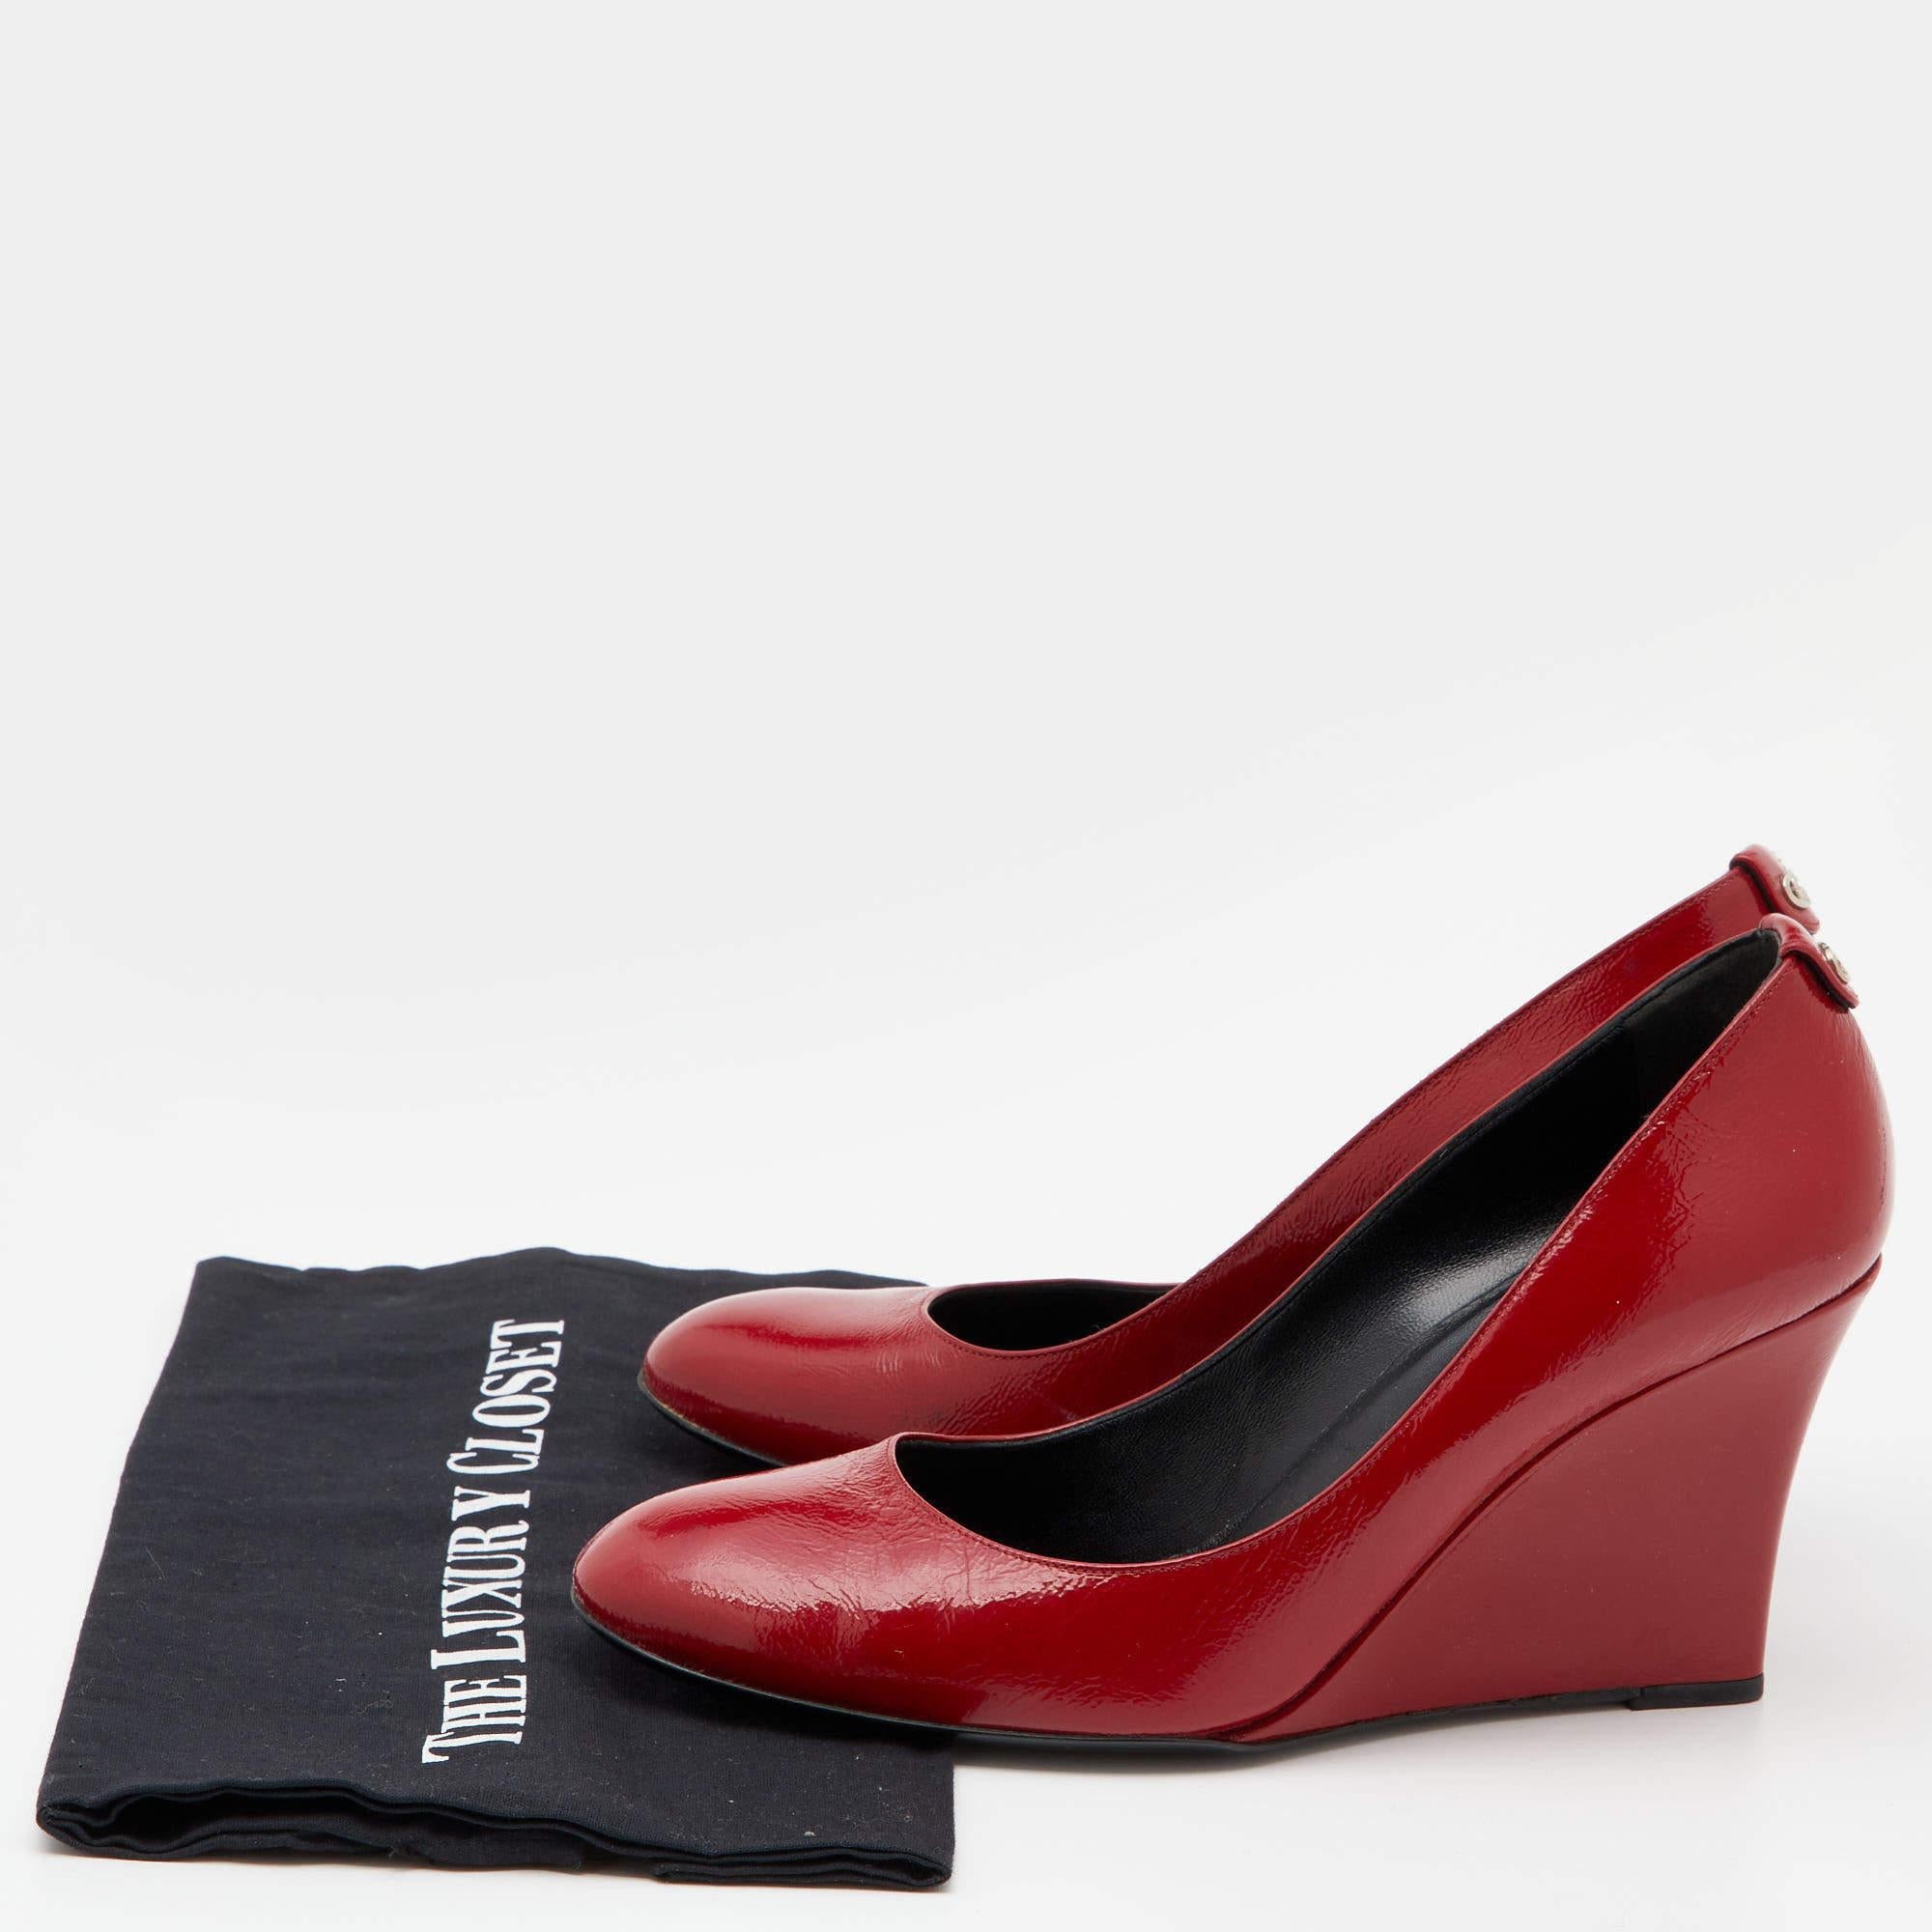 Gucci Red Patent Leather Wedge Round Toe Pumps Size 40 For Sale 3